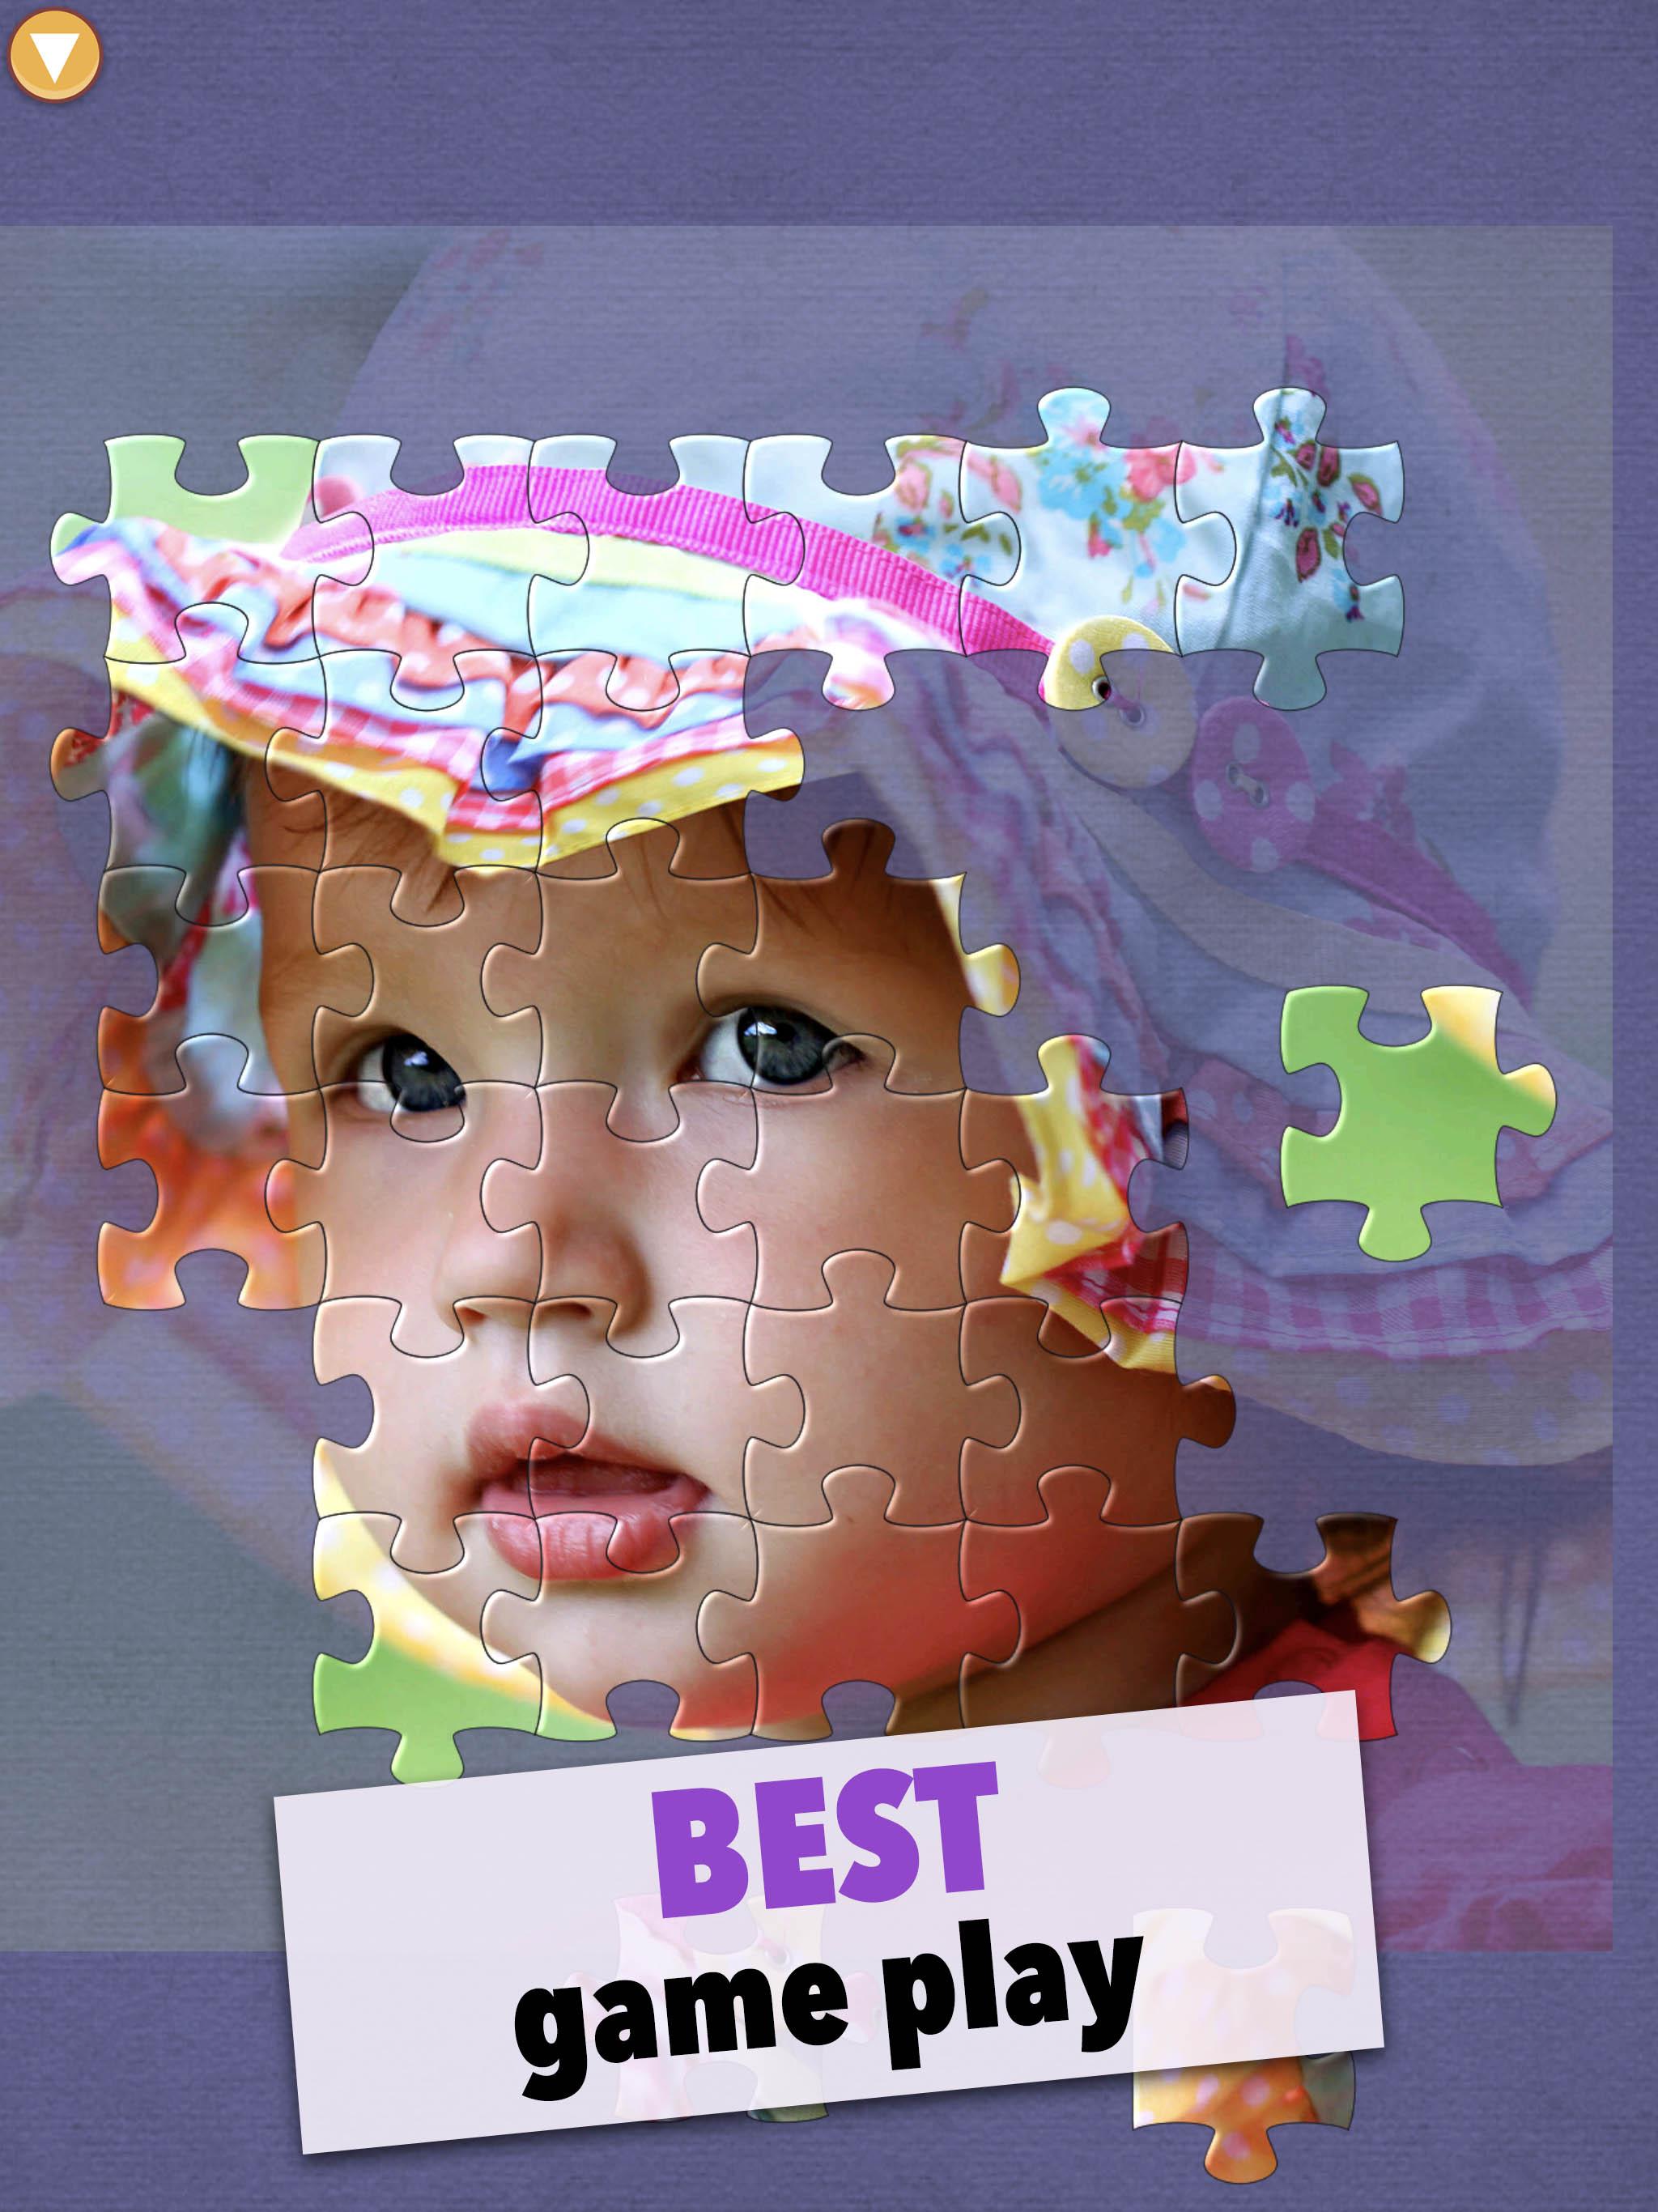 World of Puzzles - best free jigsaw puzzle games 1.16 Screenshot 12